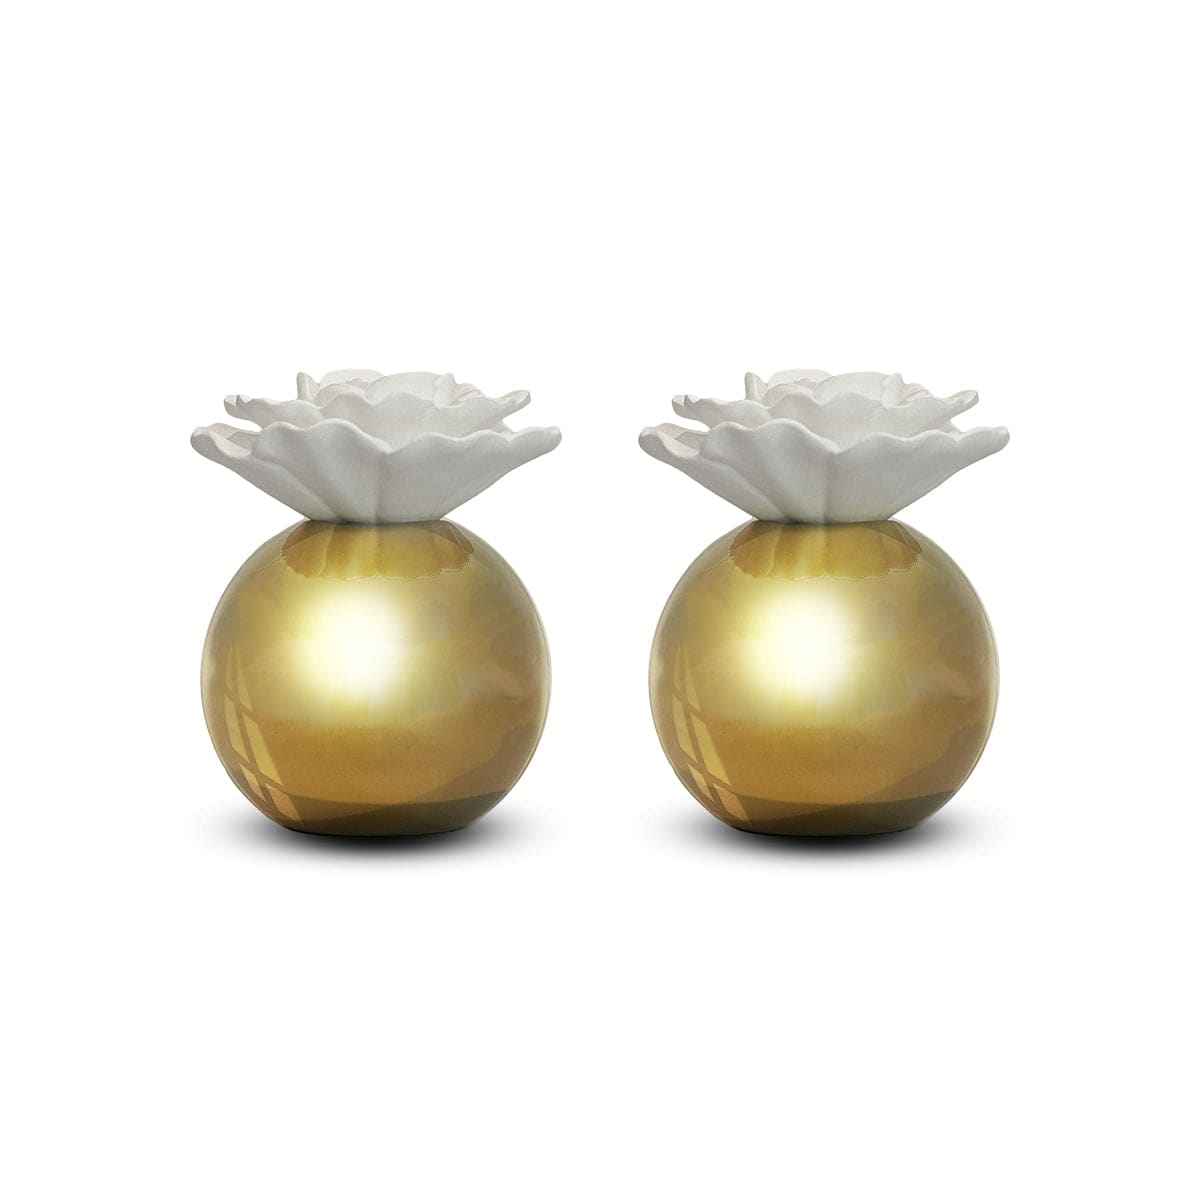 Hysses Home Scents Orion Gold Clay Diffuser Set of 2, Bergamot Sandalwood & Geranium Rosemary